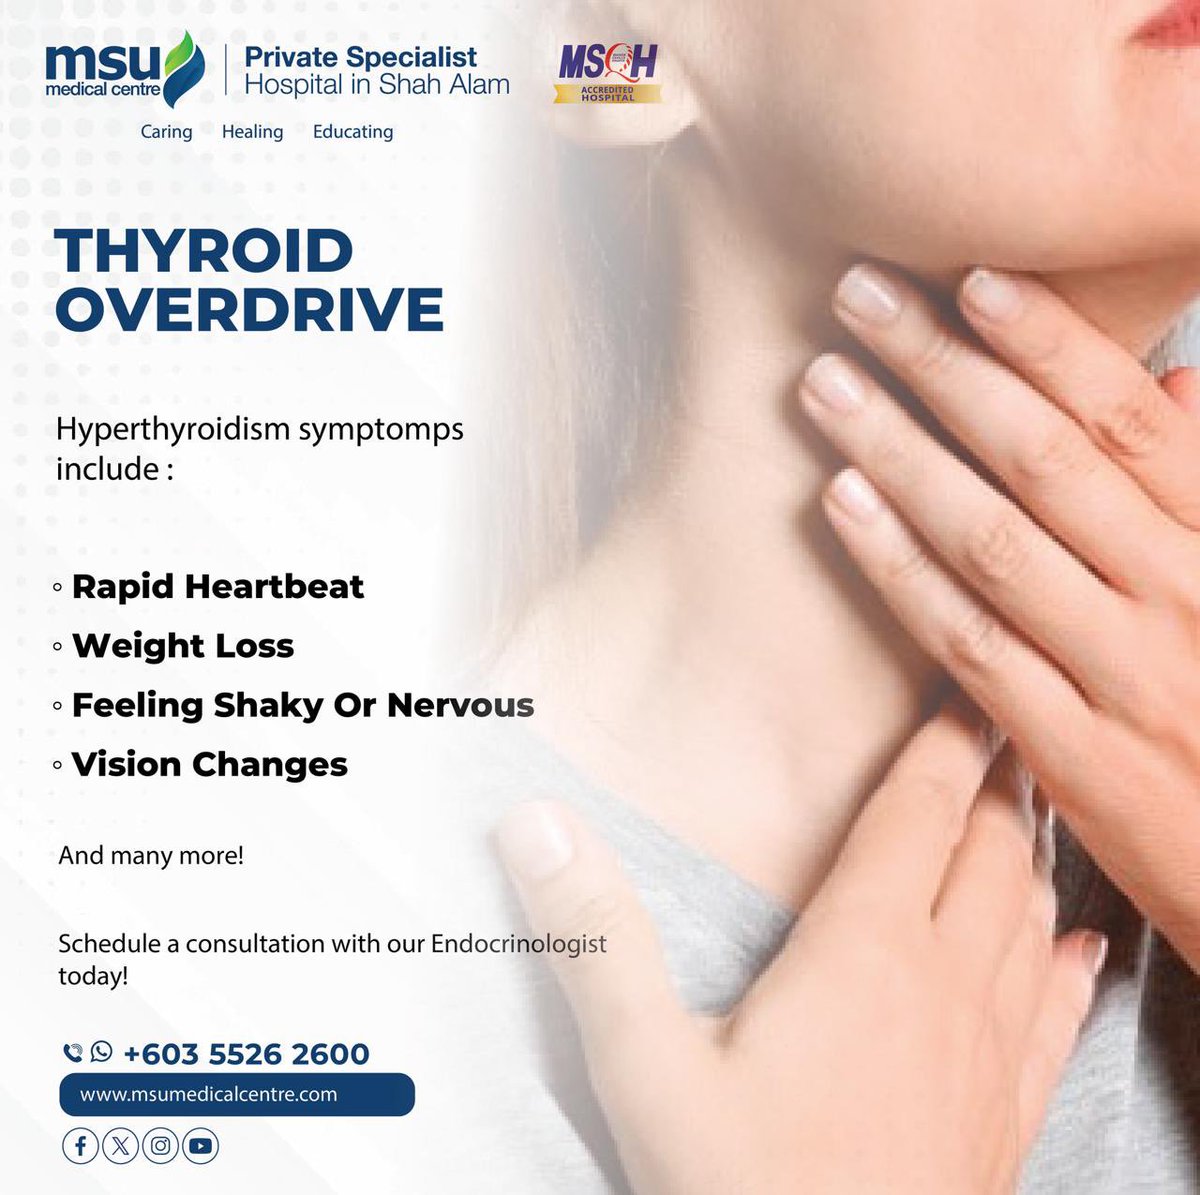 An overactive thyroid, is known as hyperthyroidism. A condition where the thyroid gland produce too much of the thyroid hormone. 
This can speed up your body’s function. 

Untreated hyperthyroidism can develop into medical emergencies if not treated.

#CaringHealingEducating